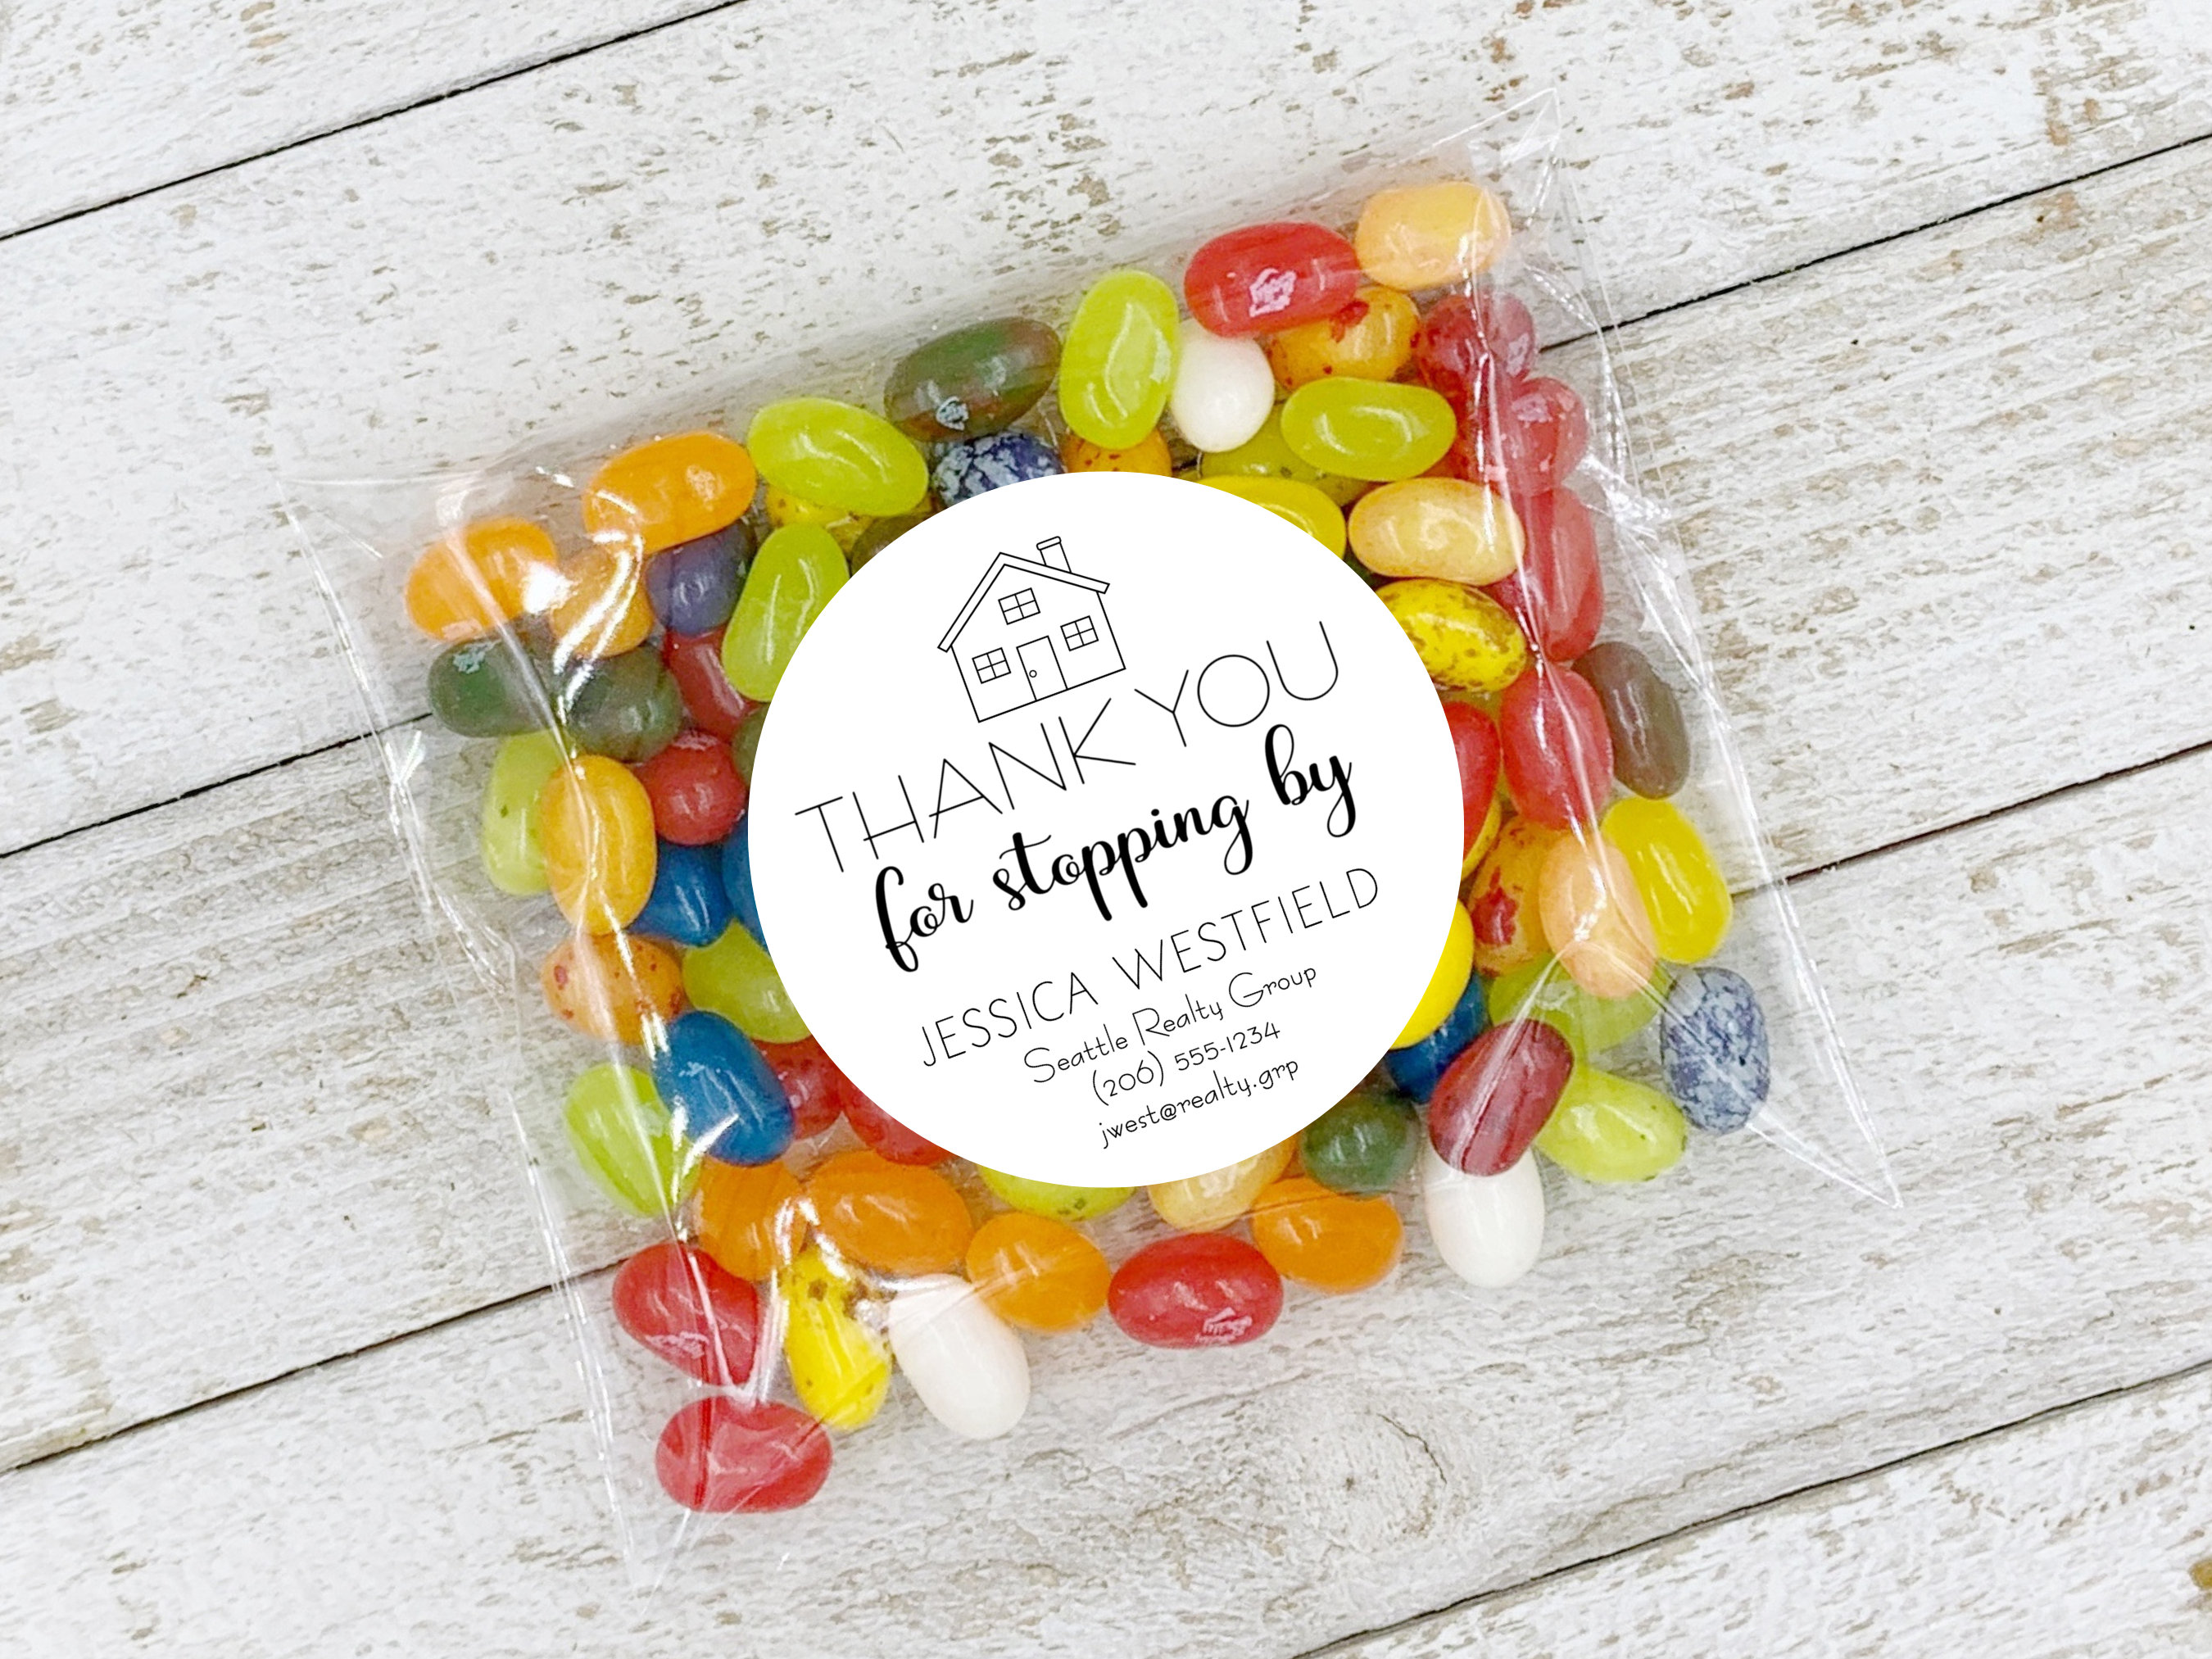 Personalized Christmas Falala Candy Bags with Jelly Belly Jelly Beans 